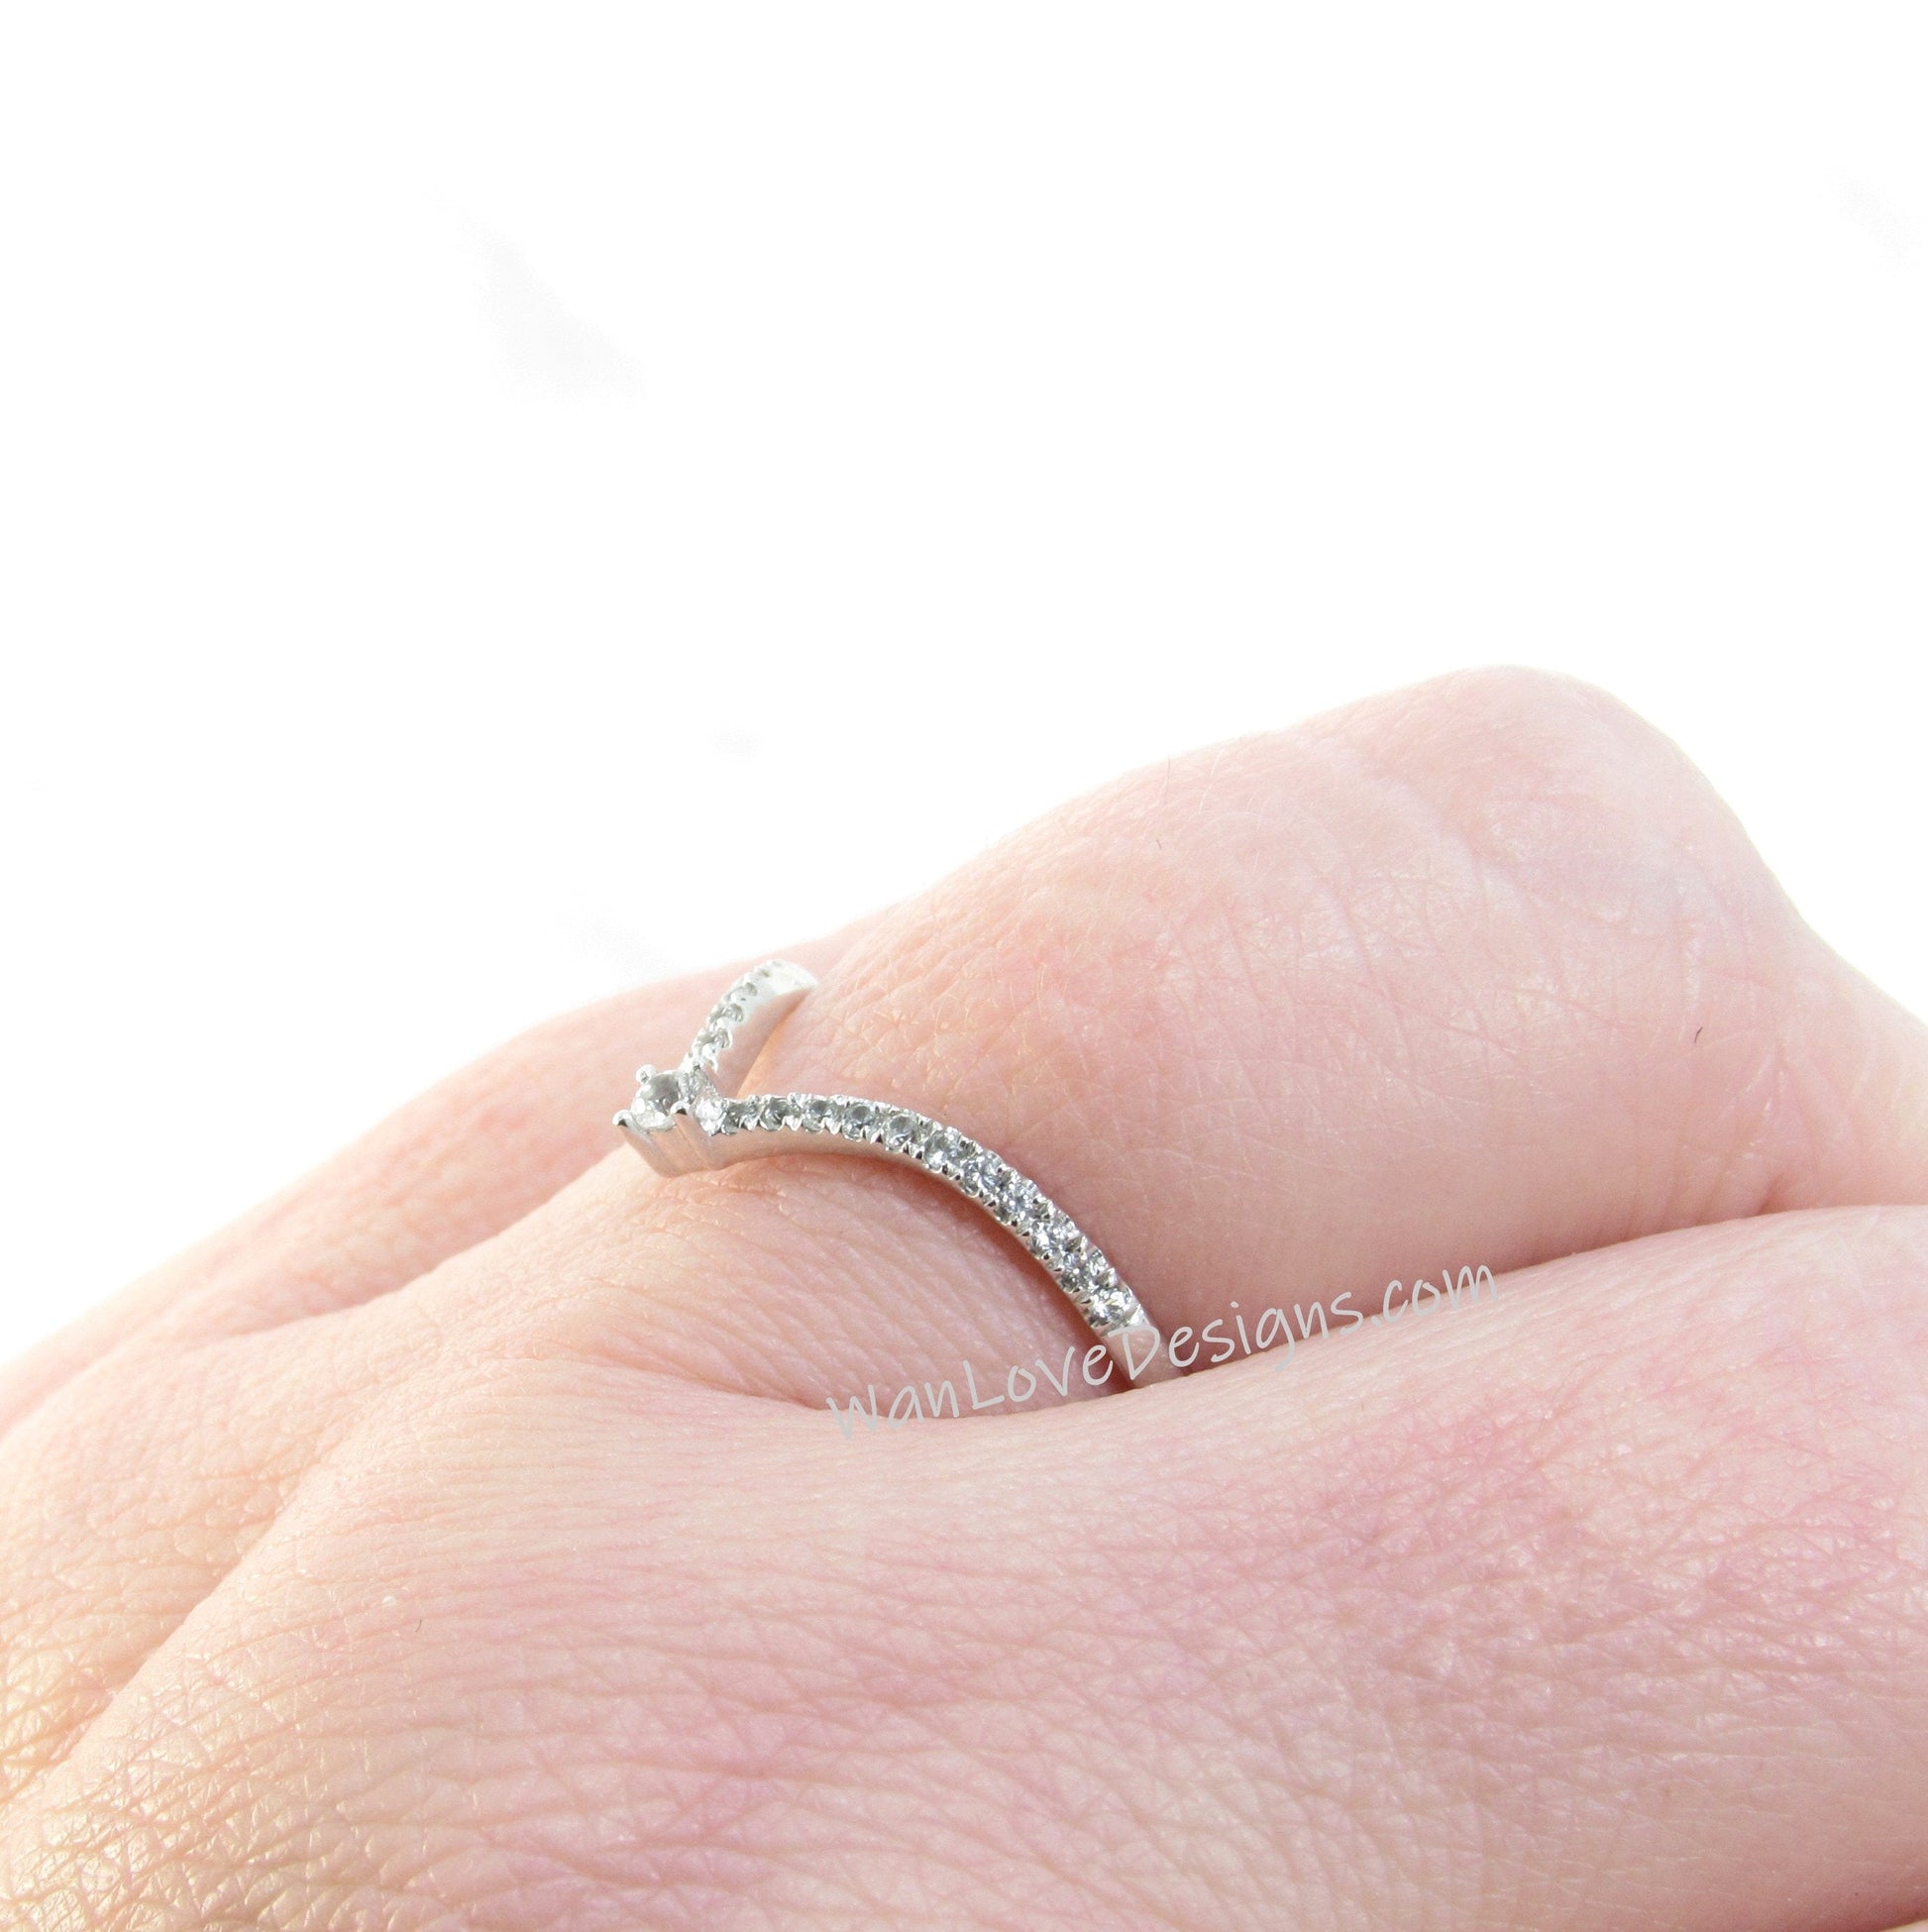 Curved V Stacking Ring • Diamond Chevron Ring, Thin Gold Minimalist Ring • Dainty Engagement Ring • Gift for Her Wan Love Designs